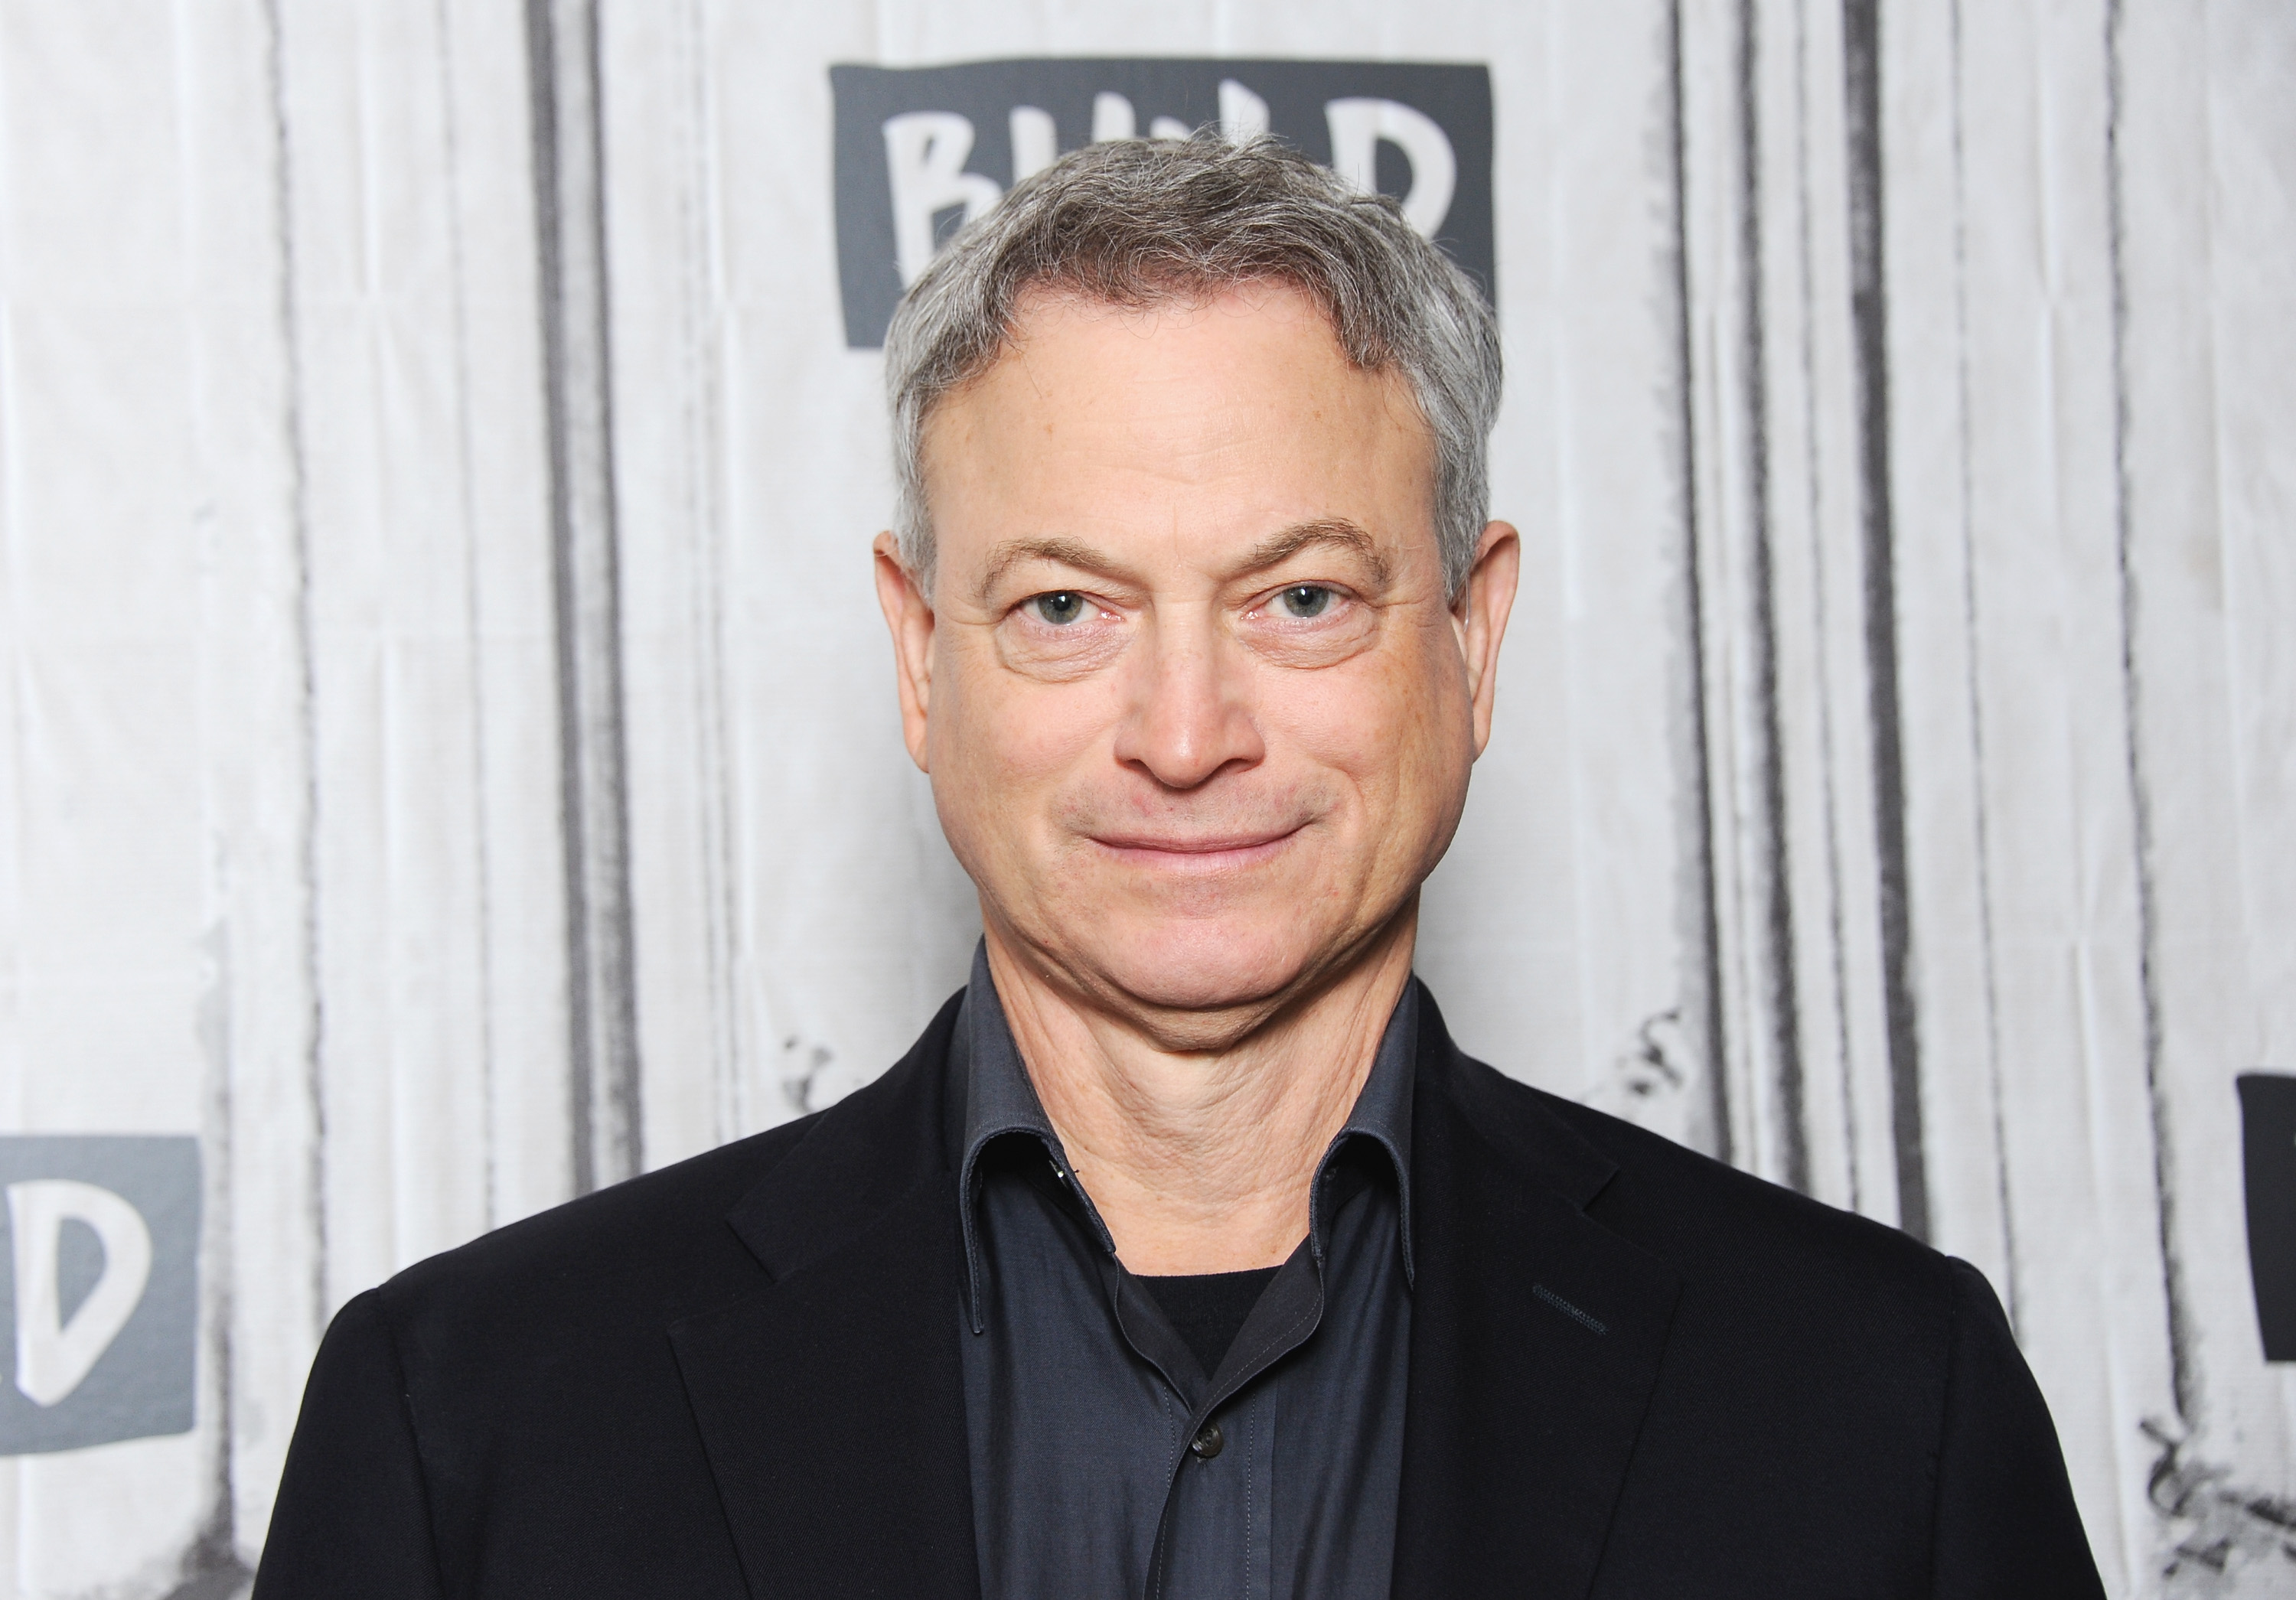 Gary Sinise at the Build Studio discussing the film "Snowball Express" on March 22, 2018 in New York City | Source: Getty Images